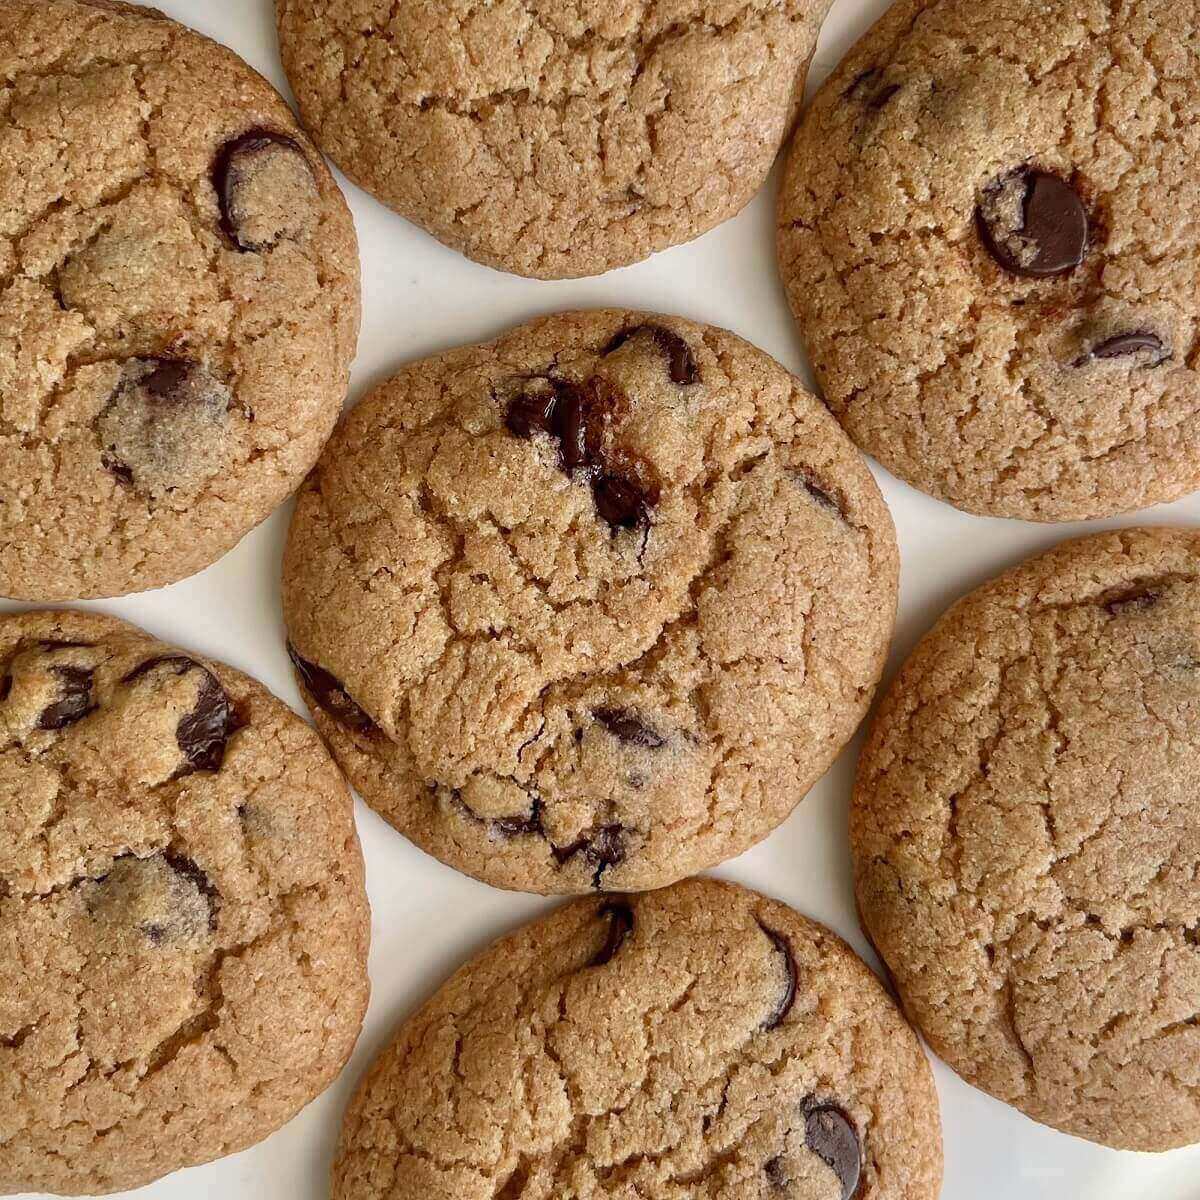 Dairy-free chocolate chip cookies on a white plate.